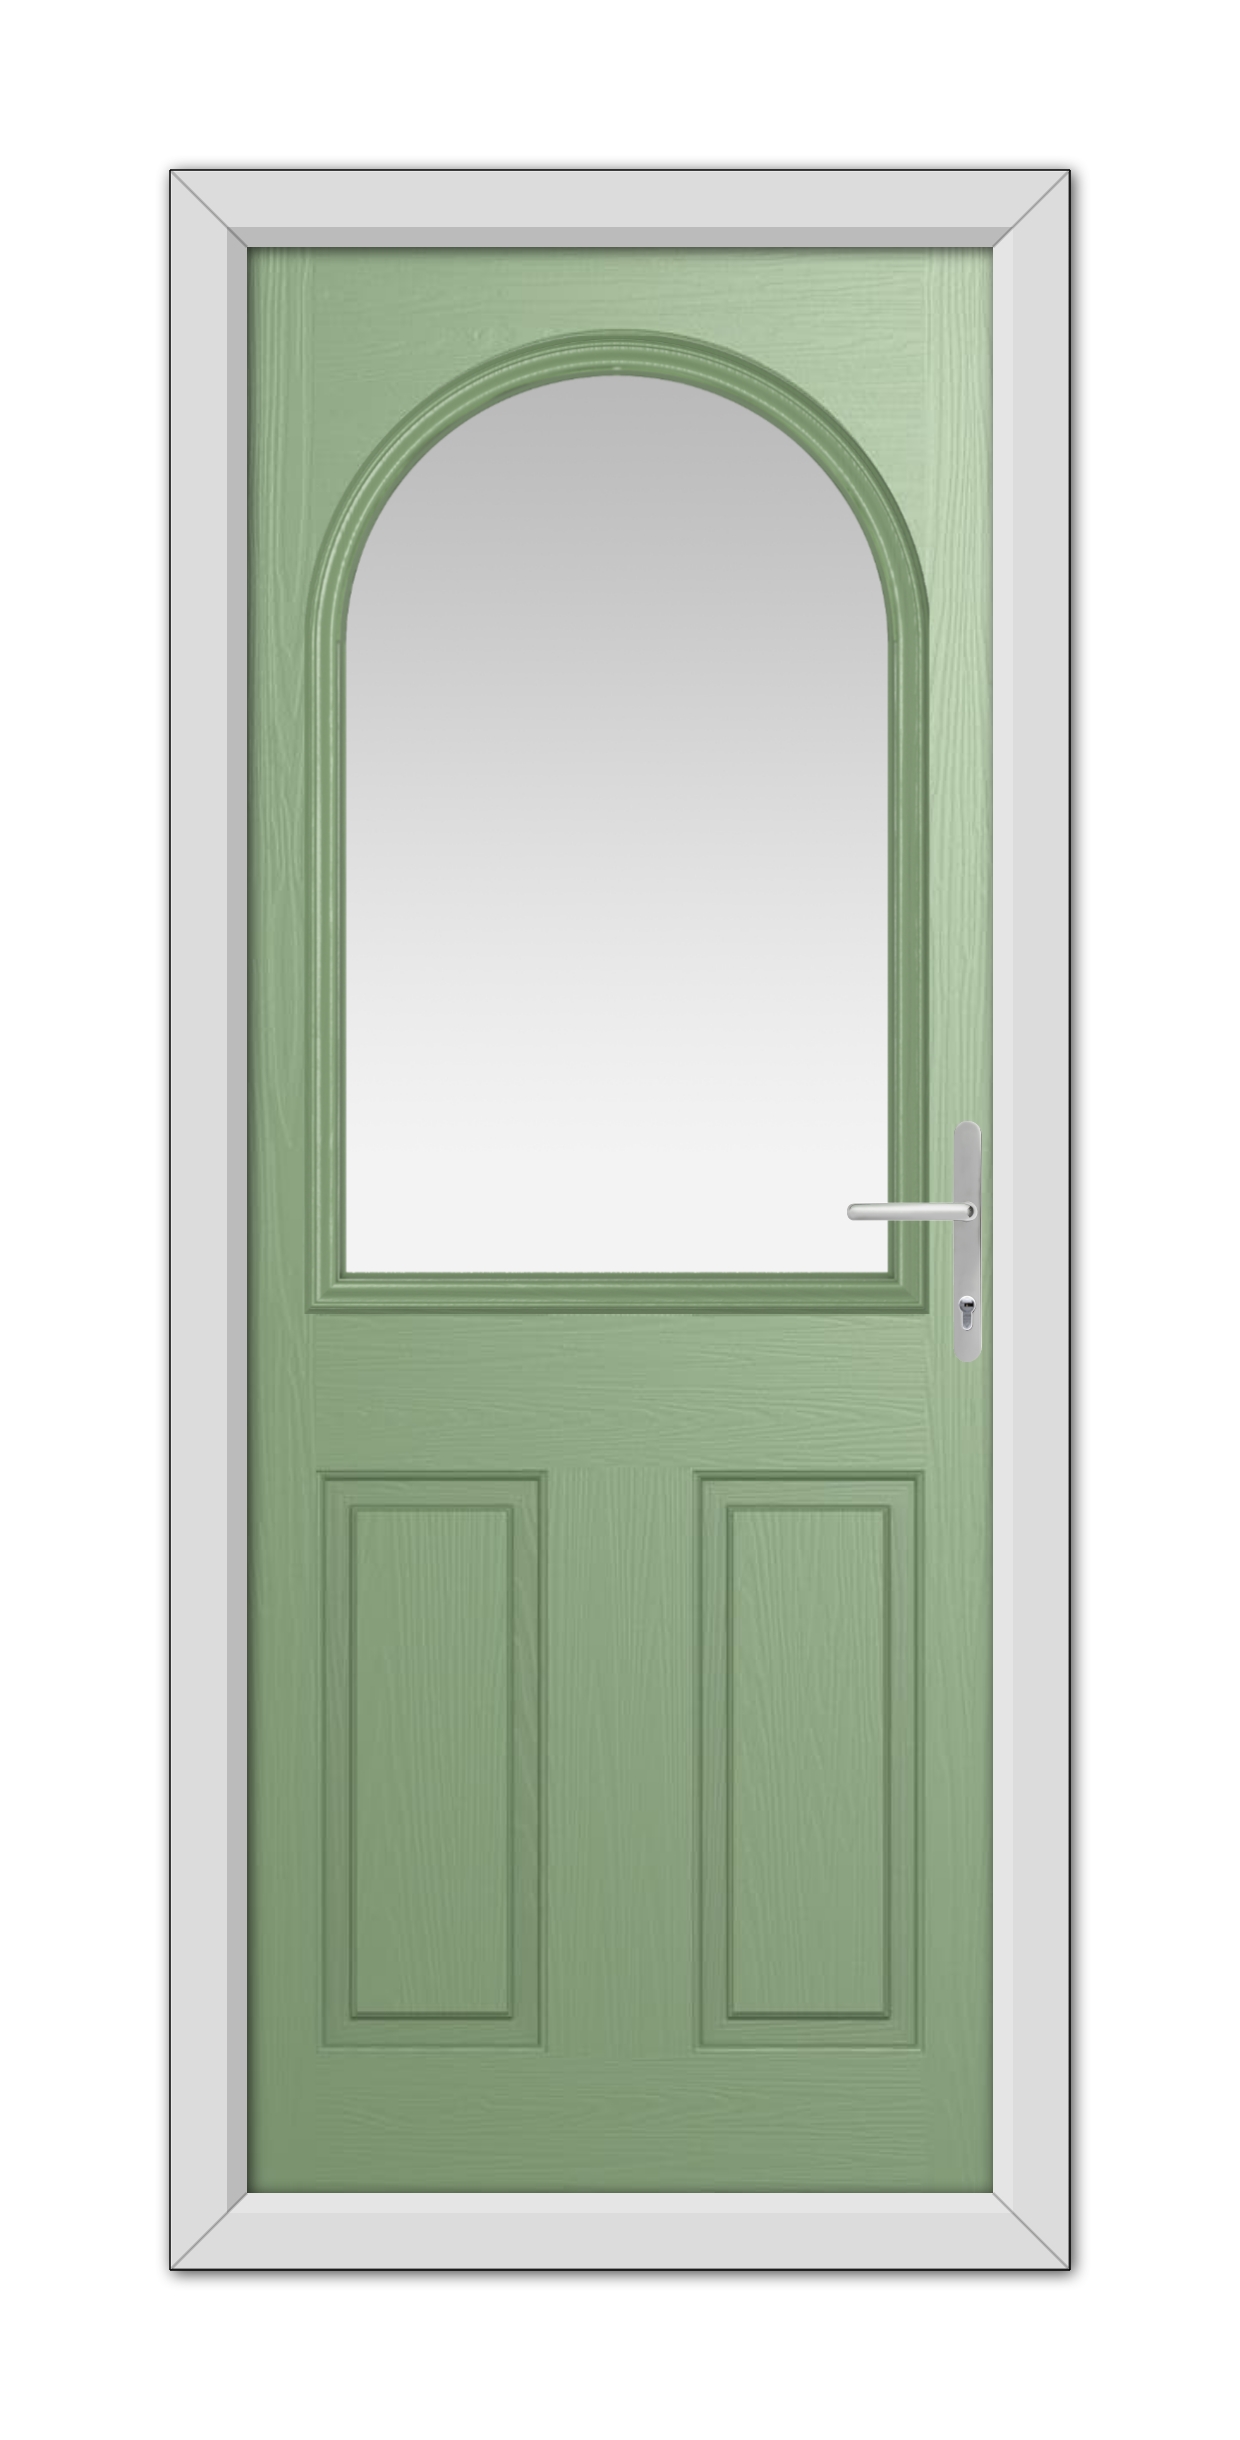 A Chartwell Green Grafton Composite Door 48mm Timber Core with a large arched window and a modern handle, set within a white frame.